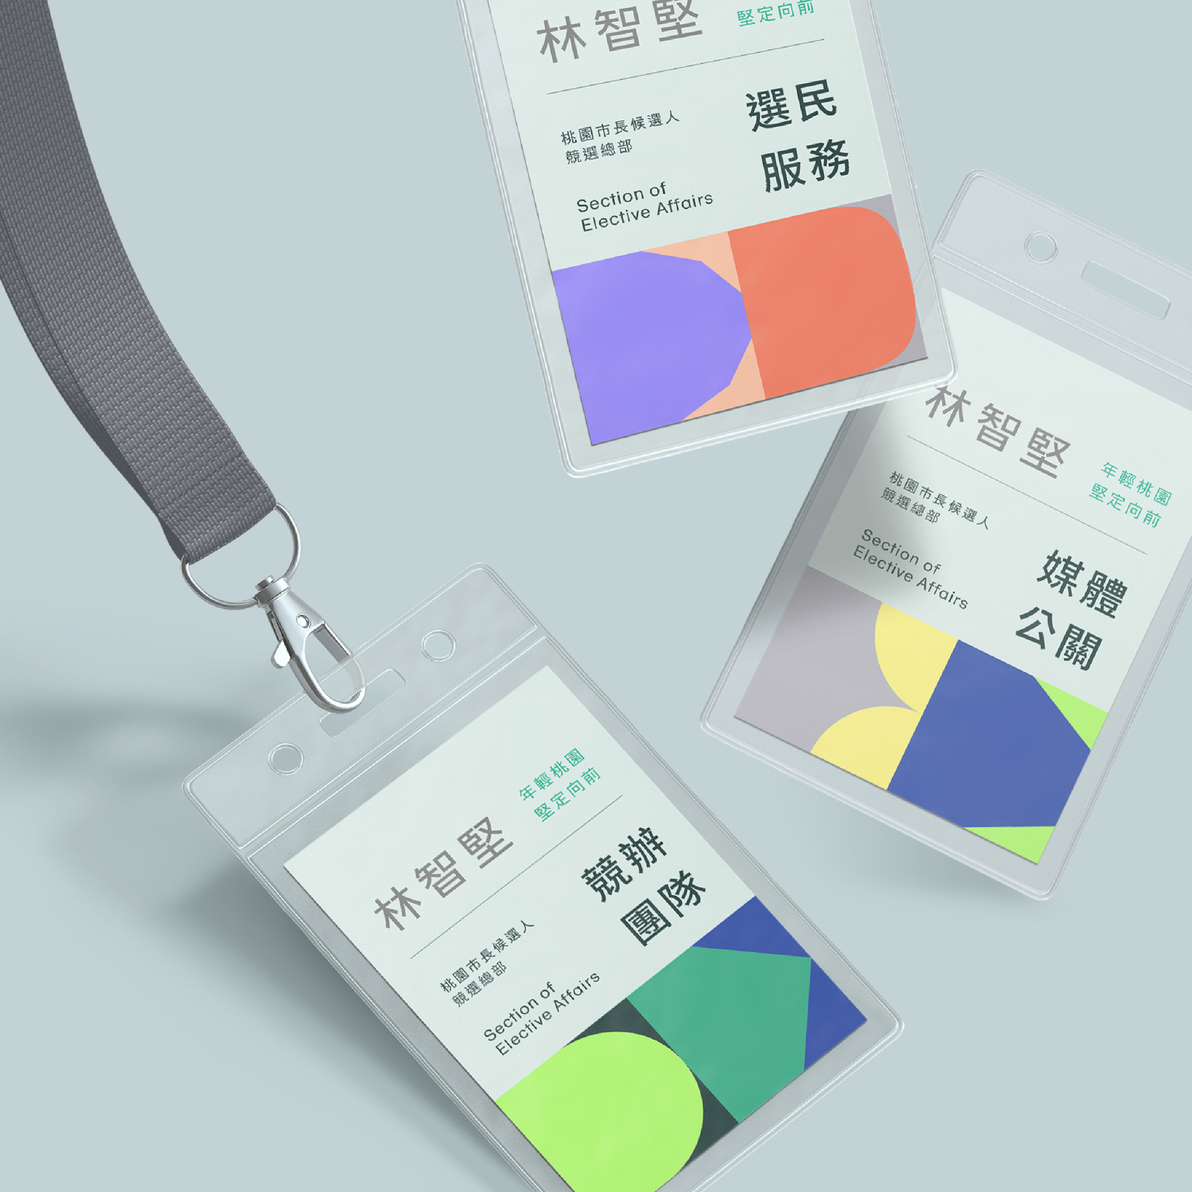 Visual Identity of 2022 Lin Chih-chien's Mayor Election Campaign in Taoyuan, Taiwan-4